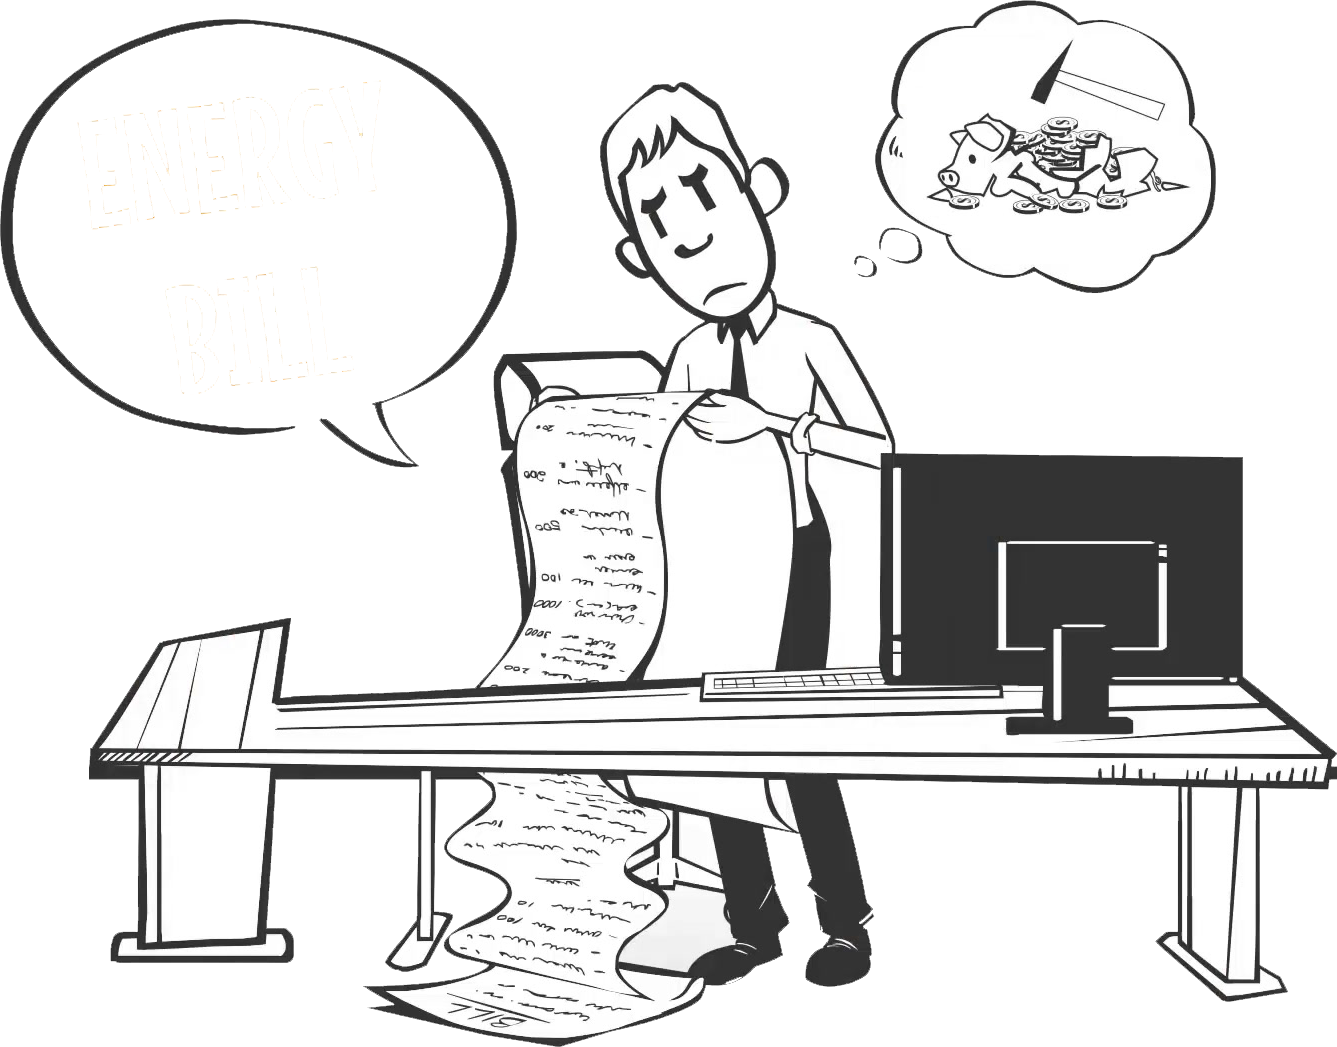 angry man looking at his large energy bill with a broken piggy bank in a thought bubble as wonders how he will pay, electricity_brokers